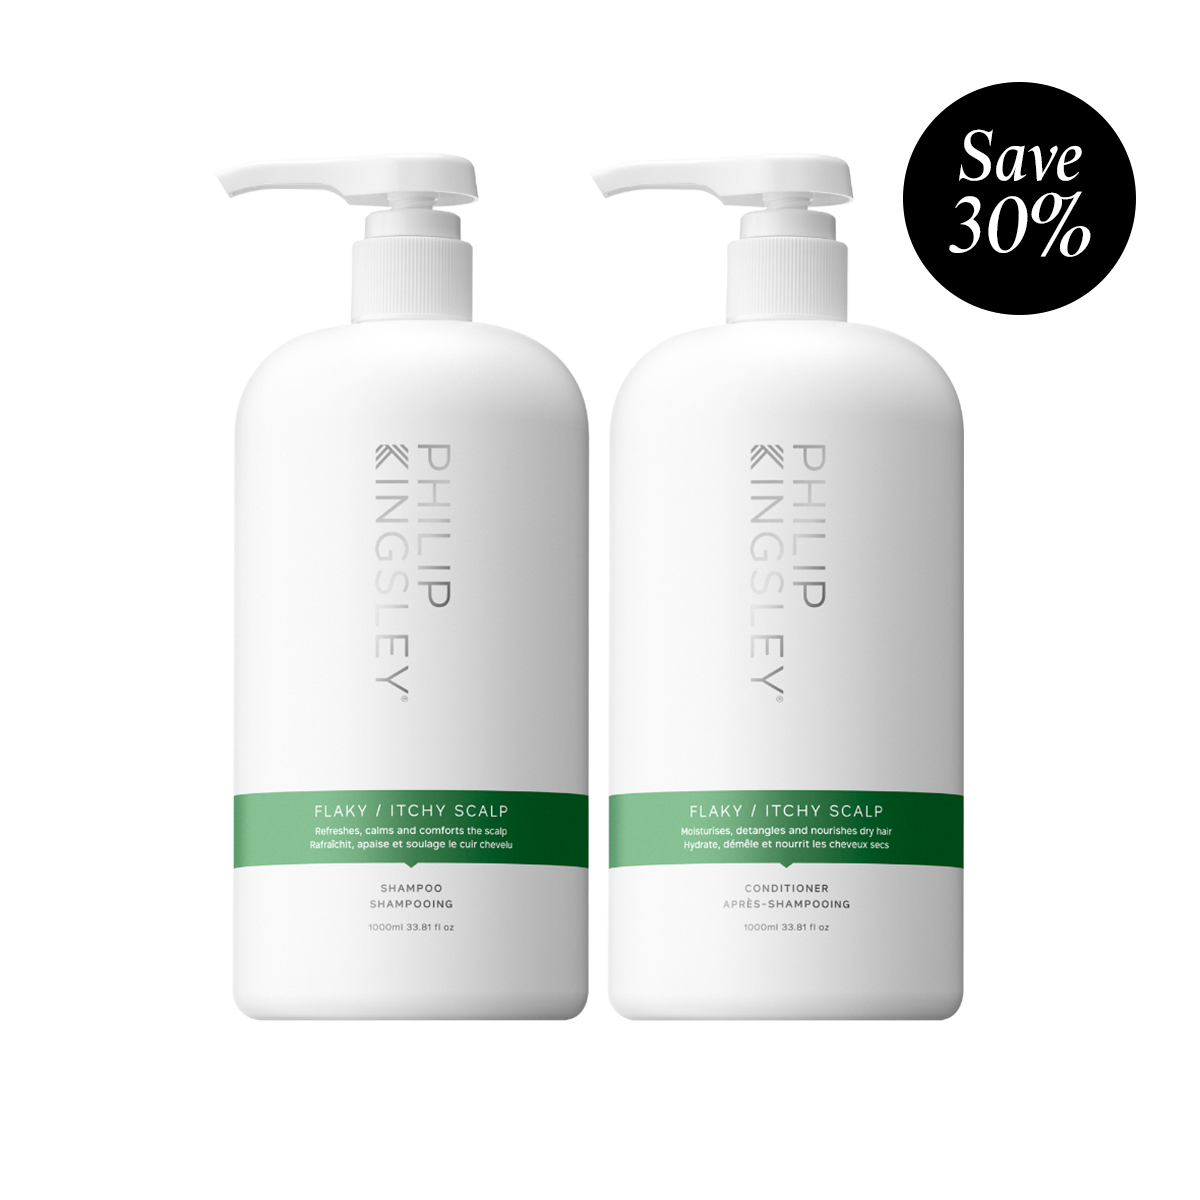 Flaky/Itchy Scalp Anti-Dandruff Shampoo & Flaky/Itchy Hydrating Conditioner Supersize Duo